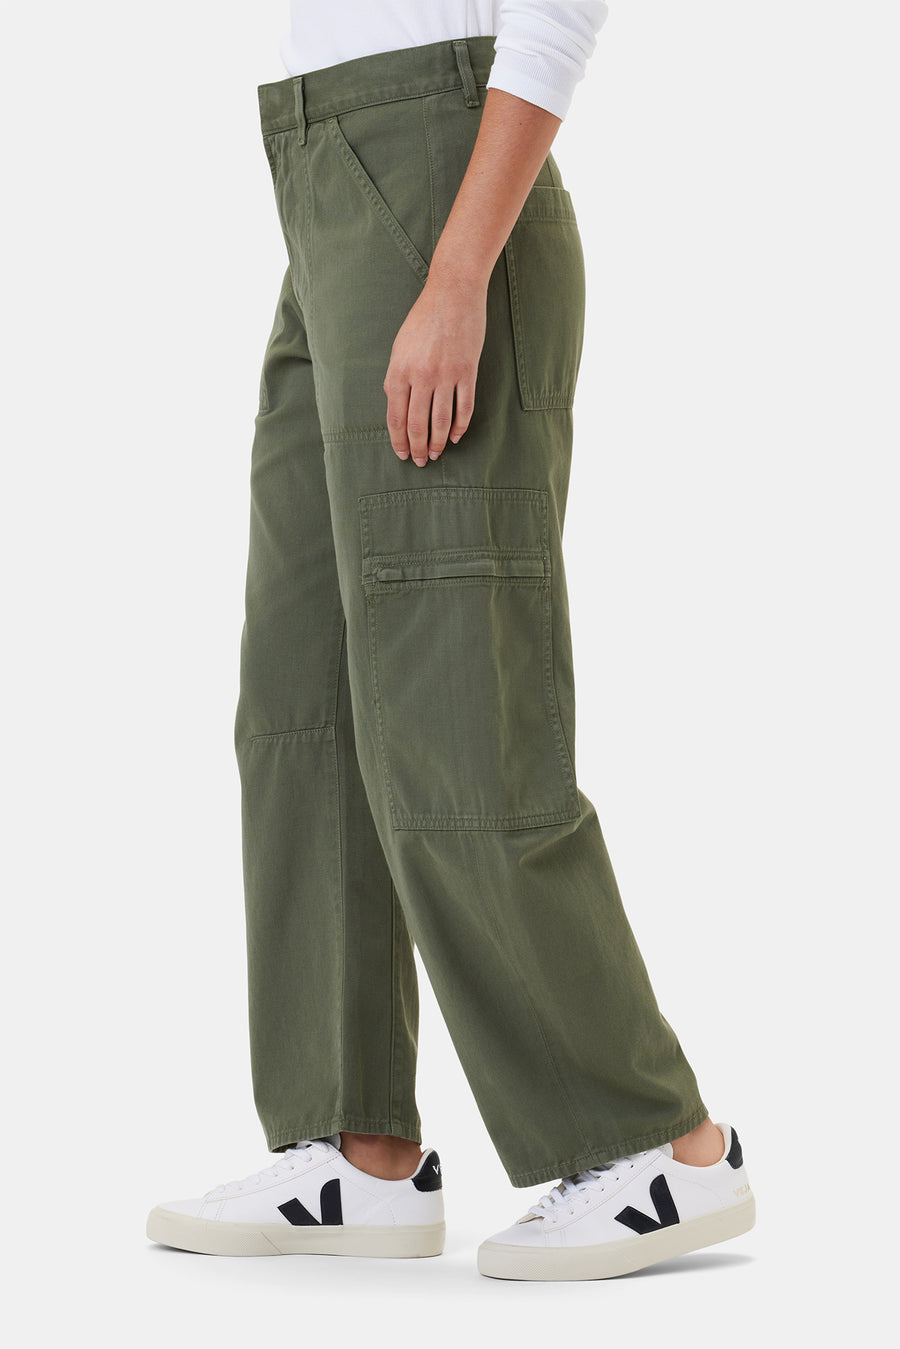 Citizens of Humanity Marcelle Cargo Pant - Surplus